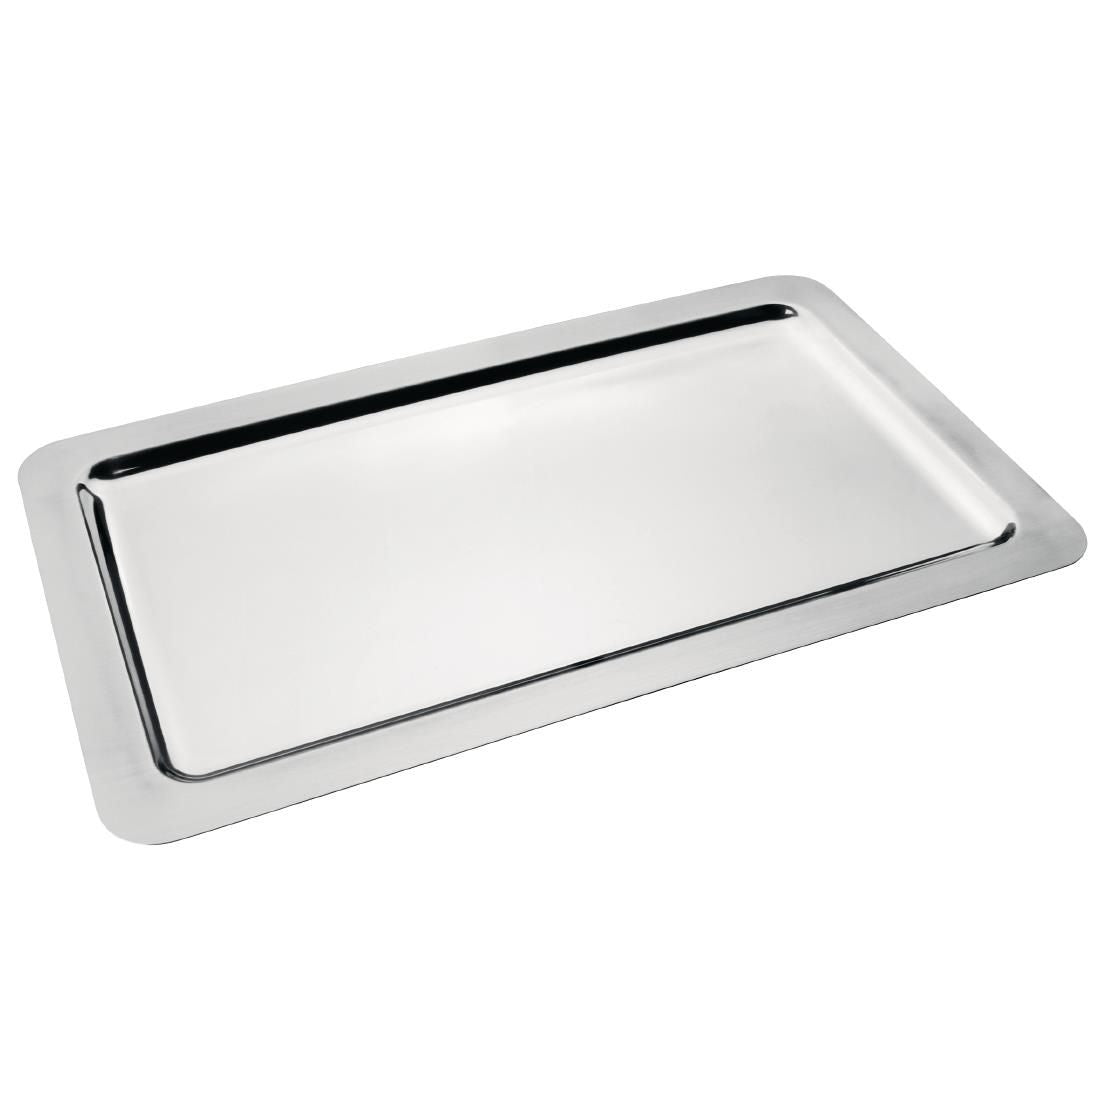 CN599 Olympia Stainless Steel Food Presentation Tray GN 1/1 JD Catering Equipment Solutions Ltd